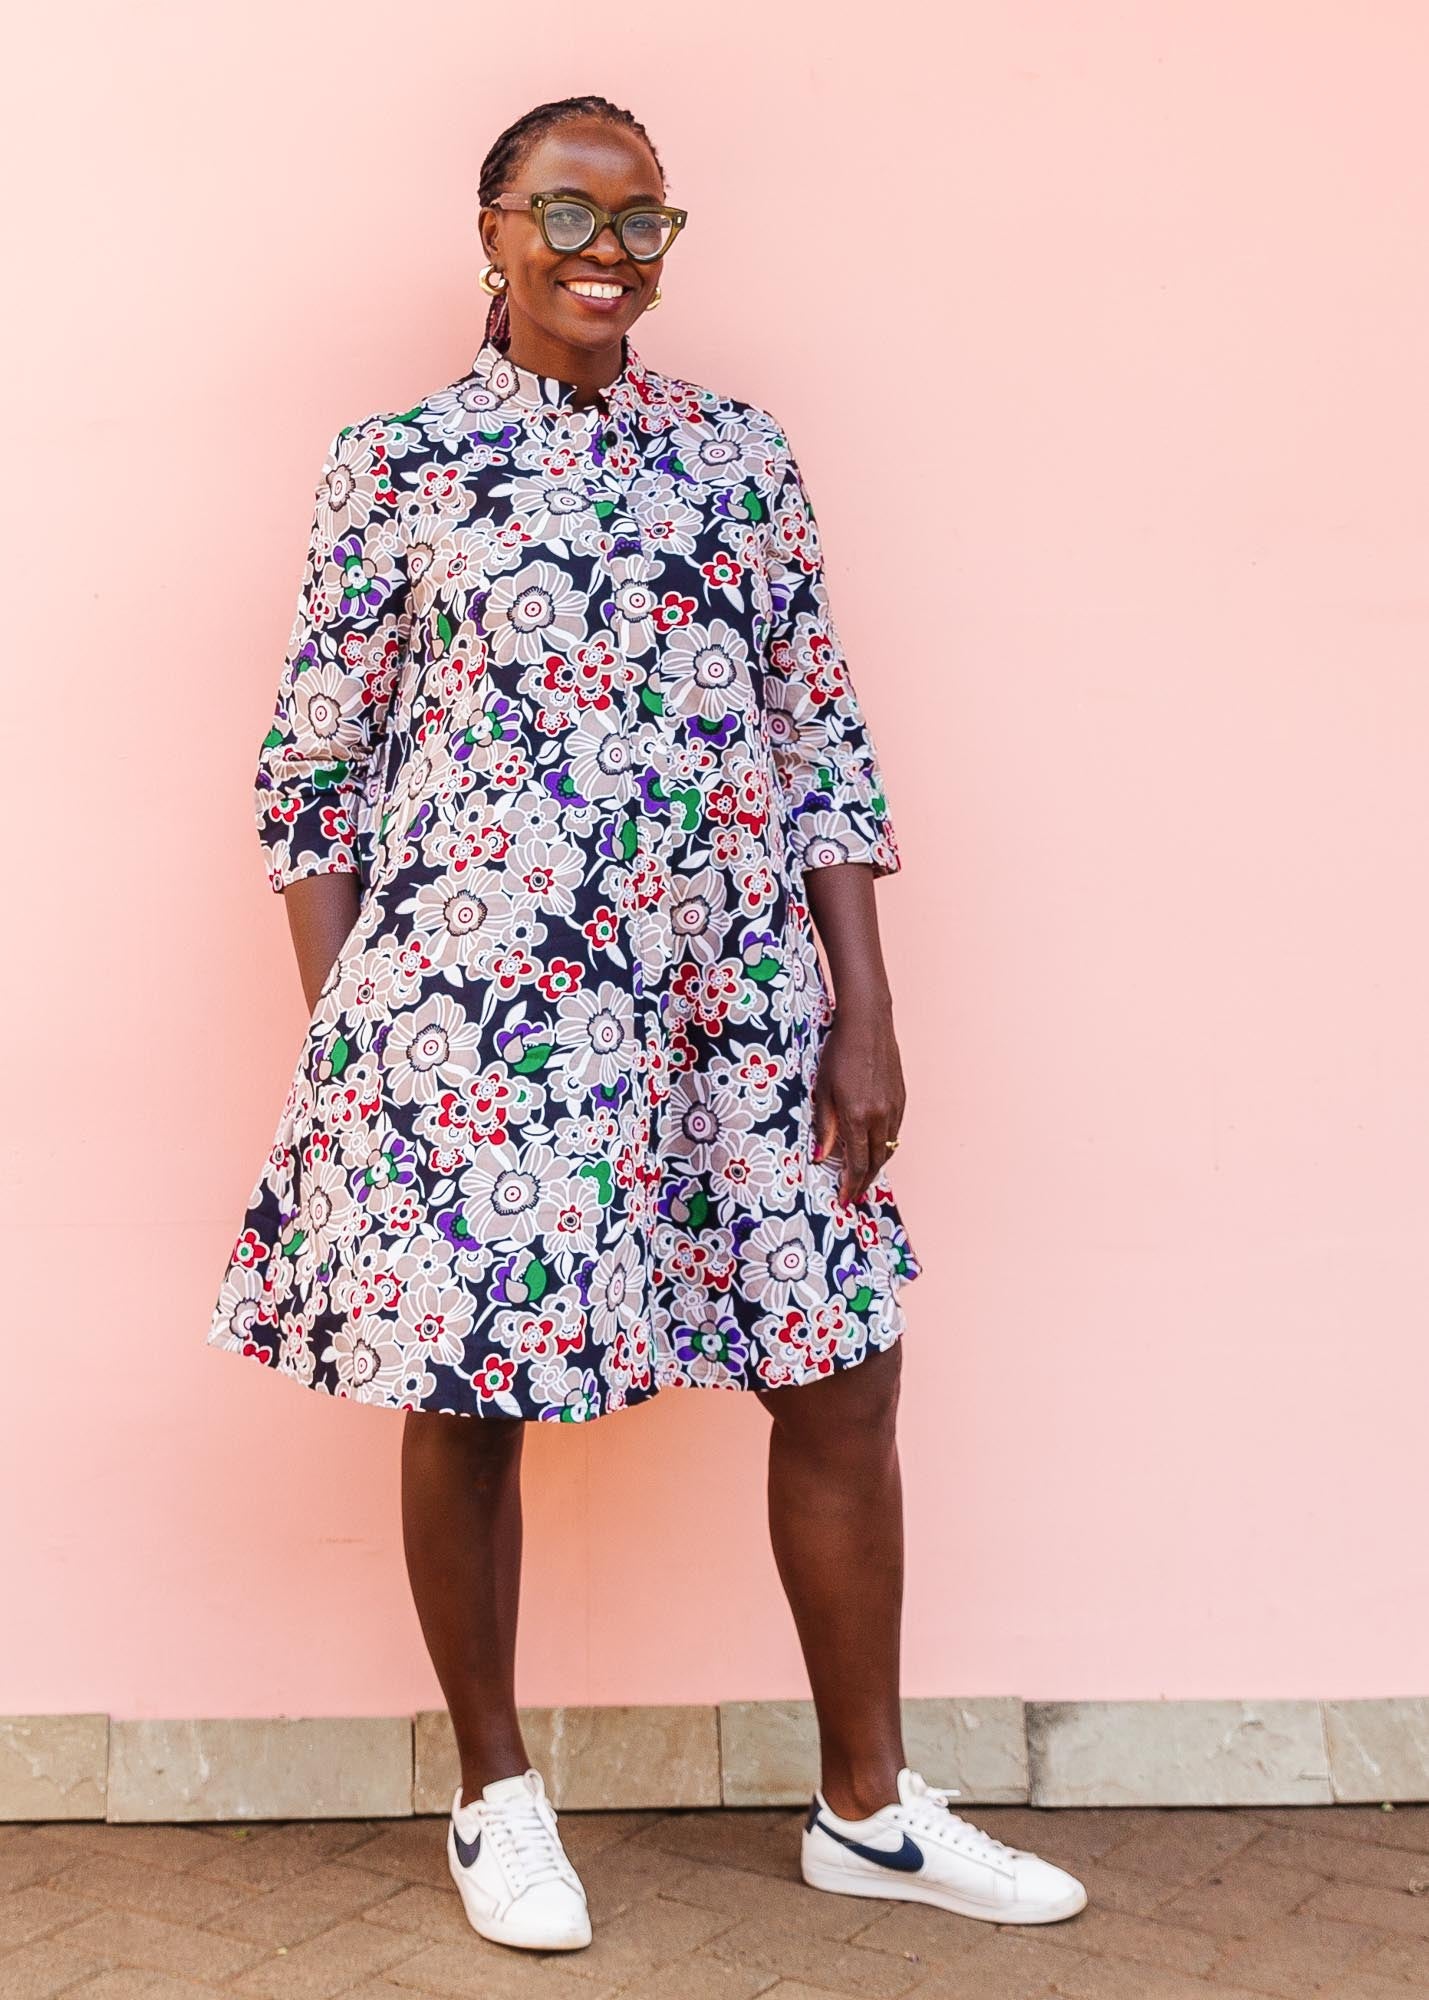 The model is wearing multi-colored floral print 